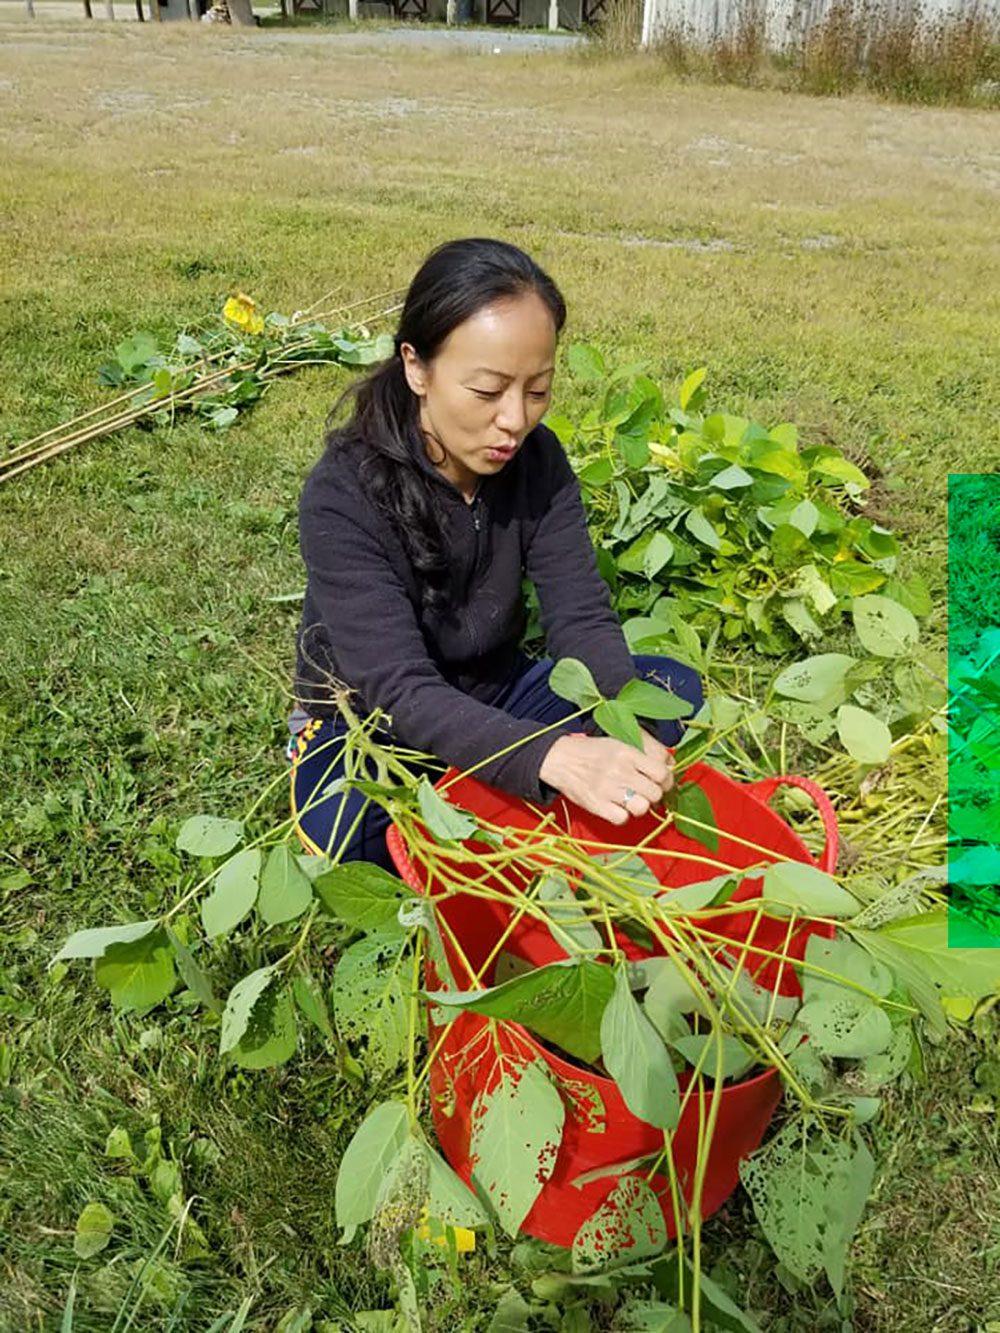 A woman harvests greens from the branch into her red bucket